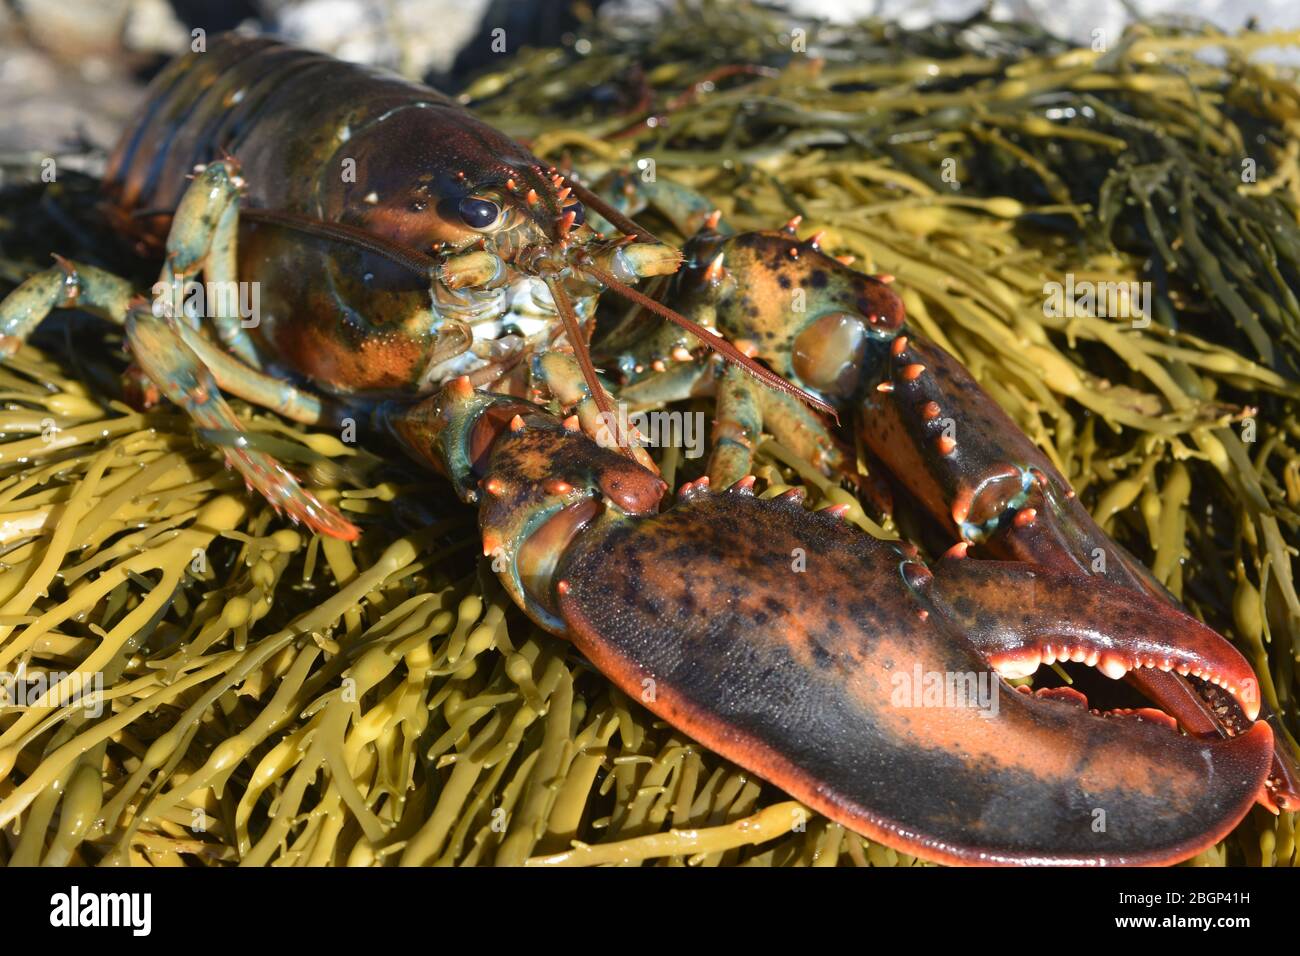 Stunning photo of a red lobster Stock Photo